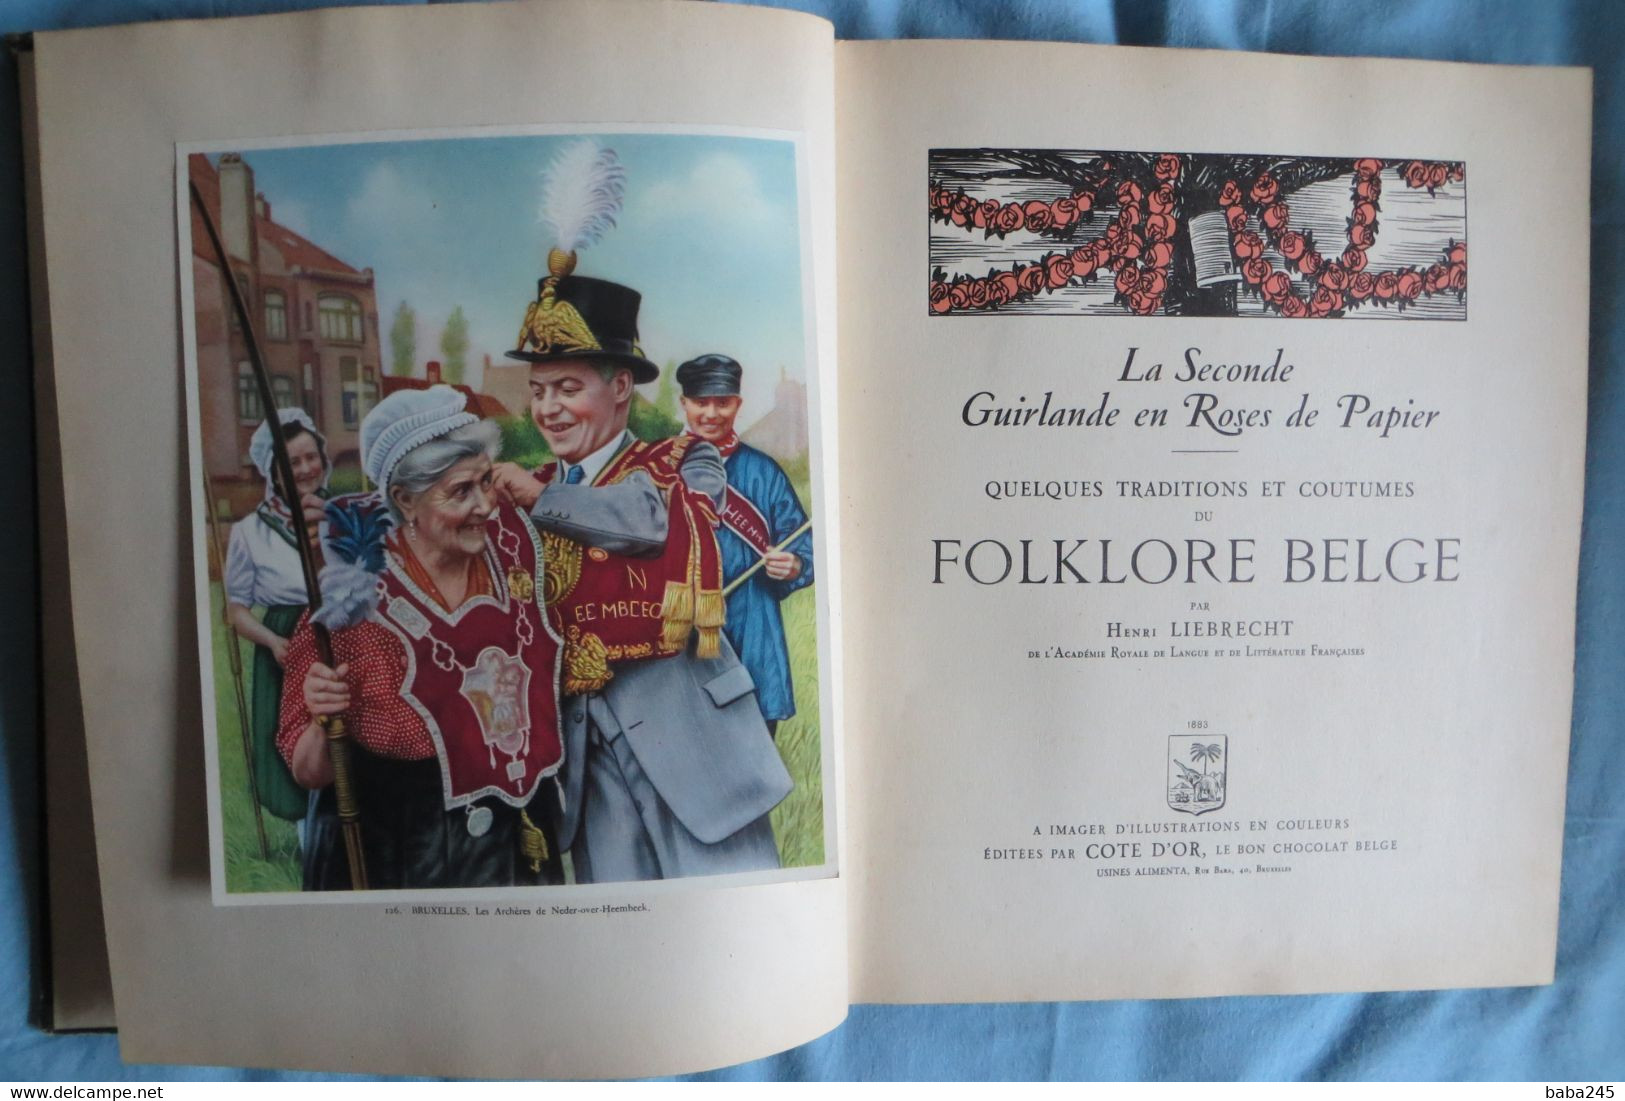 ULBUM IMAGES CHOCOLAT COTE D'OR FOLKLORE BELGE N° 2 COMPLET TBE - Chocolat